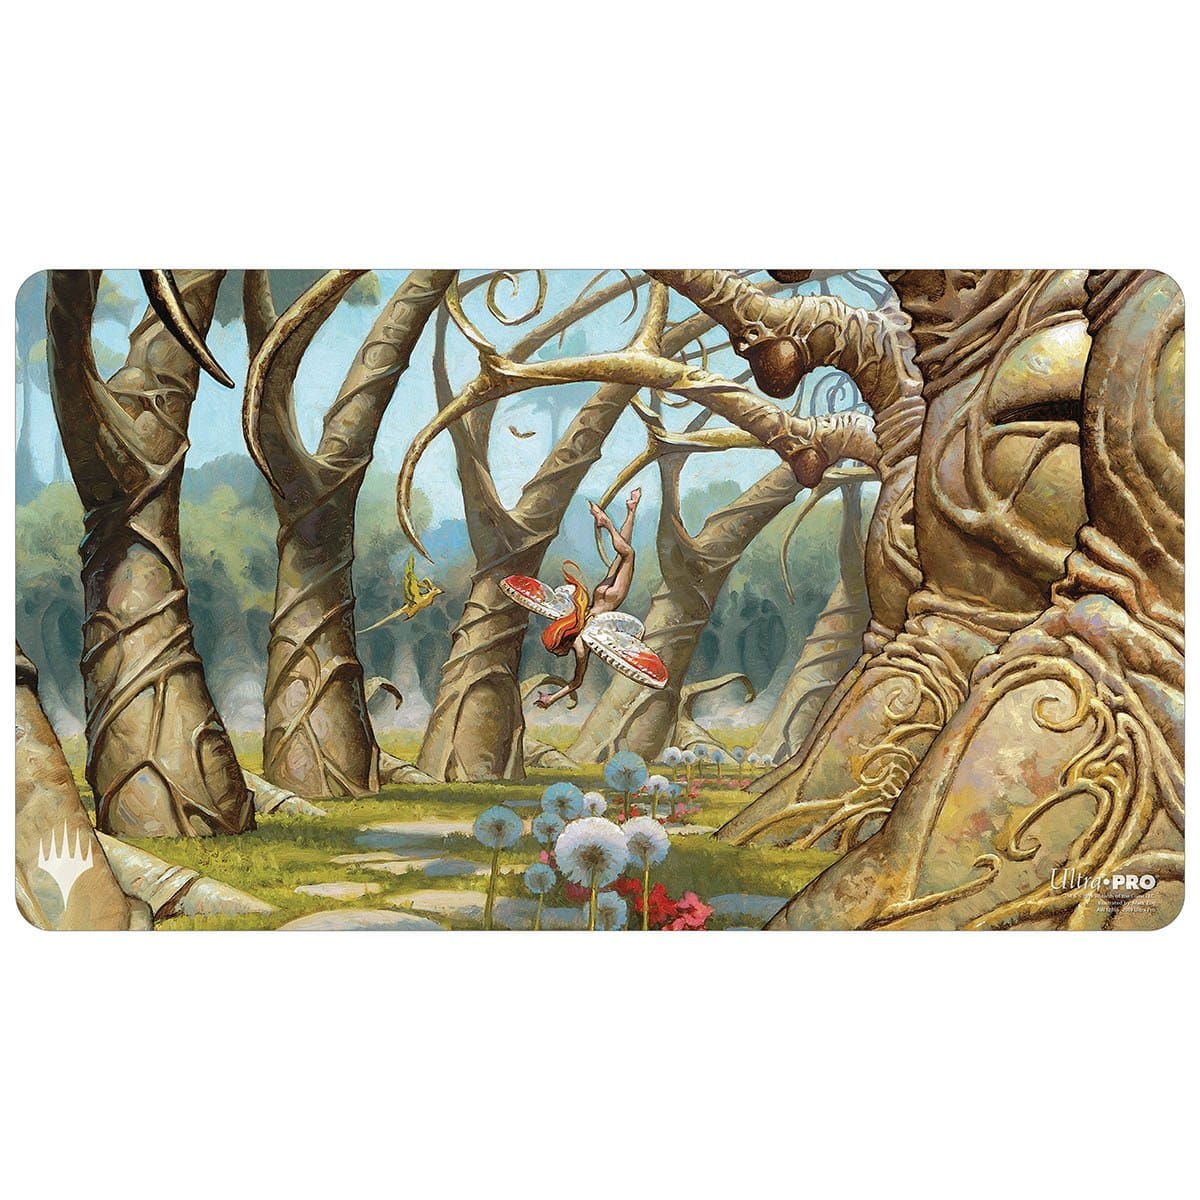 Gaea's Cradle Playmat - Playmat - Original Magic Art - Accessories for Magic the Gathering and other card games